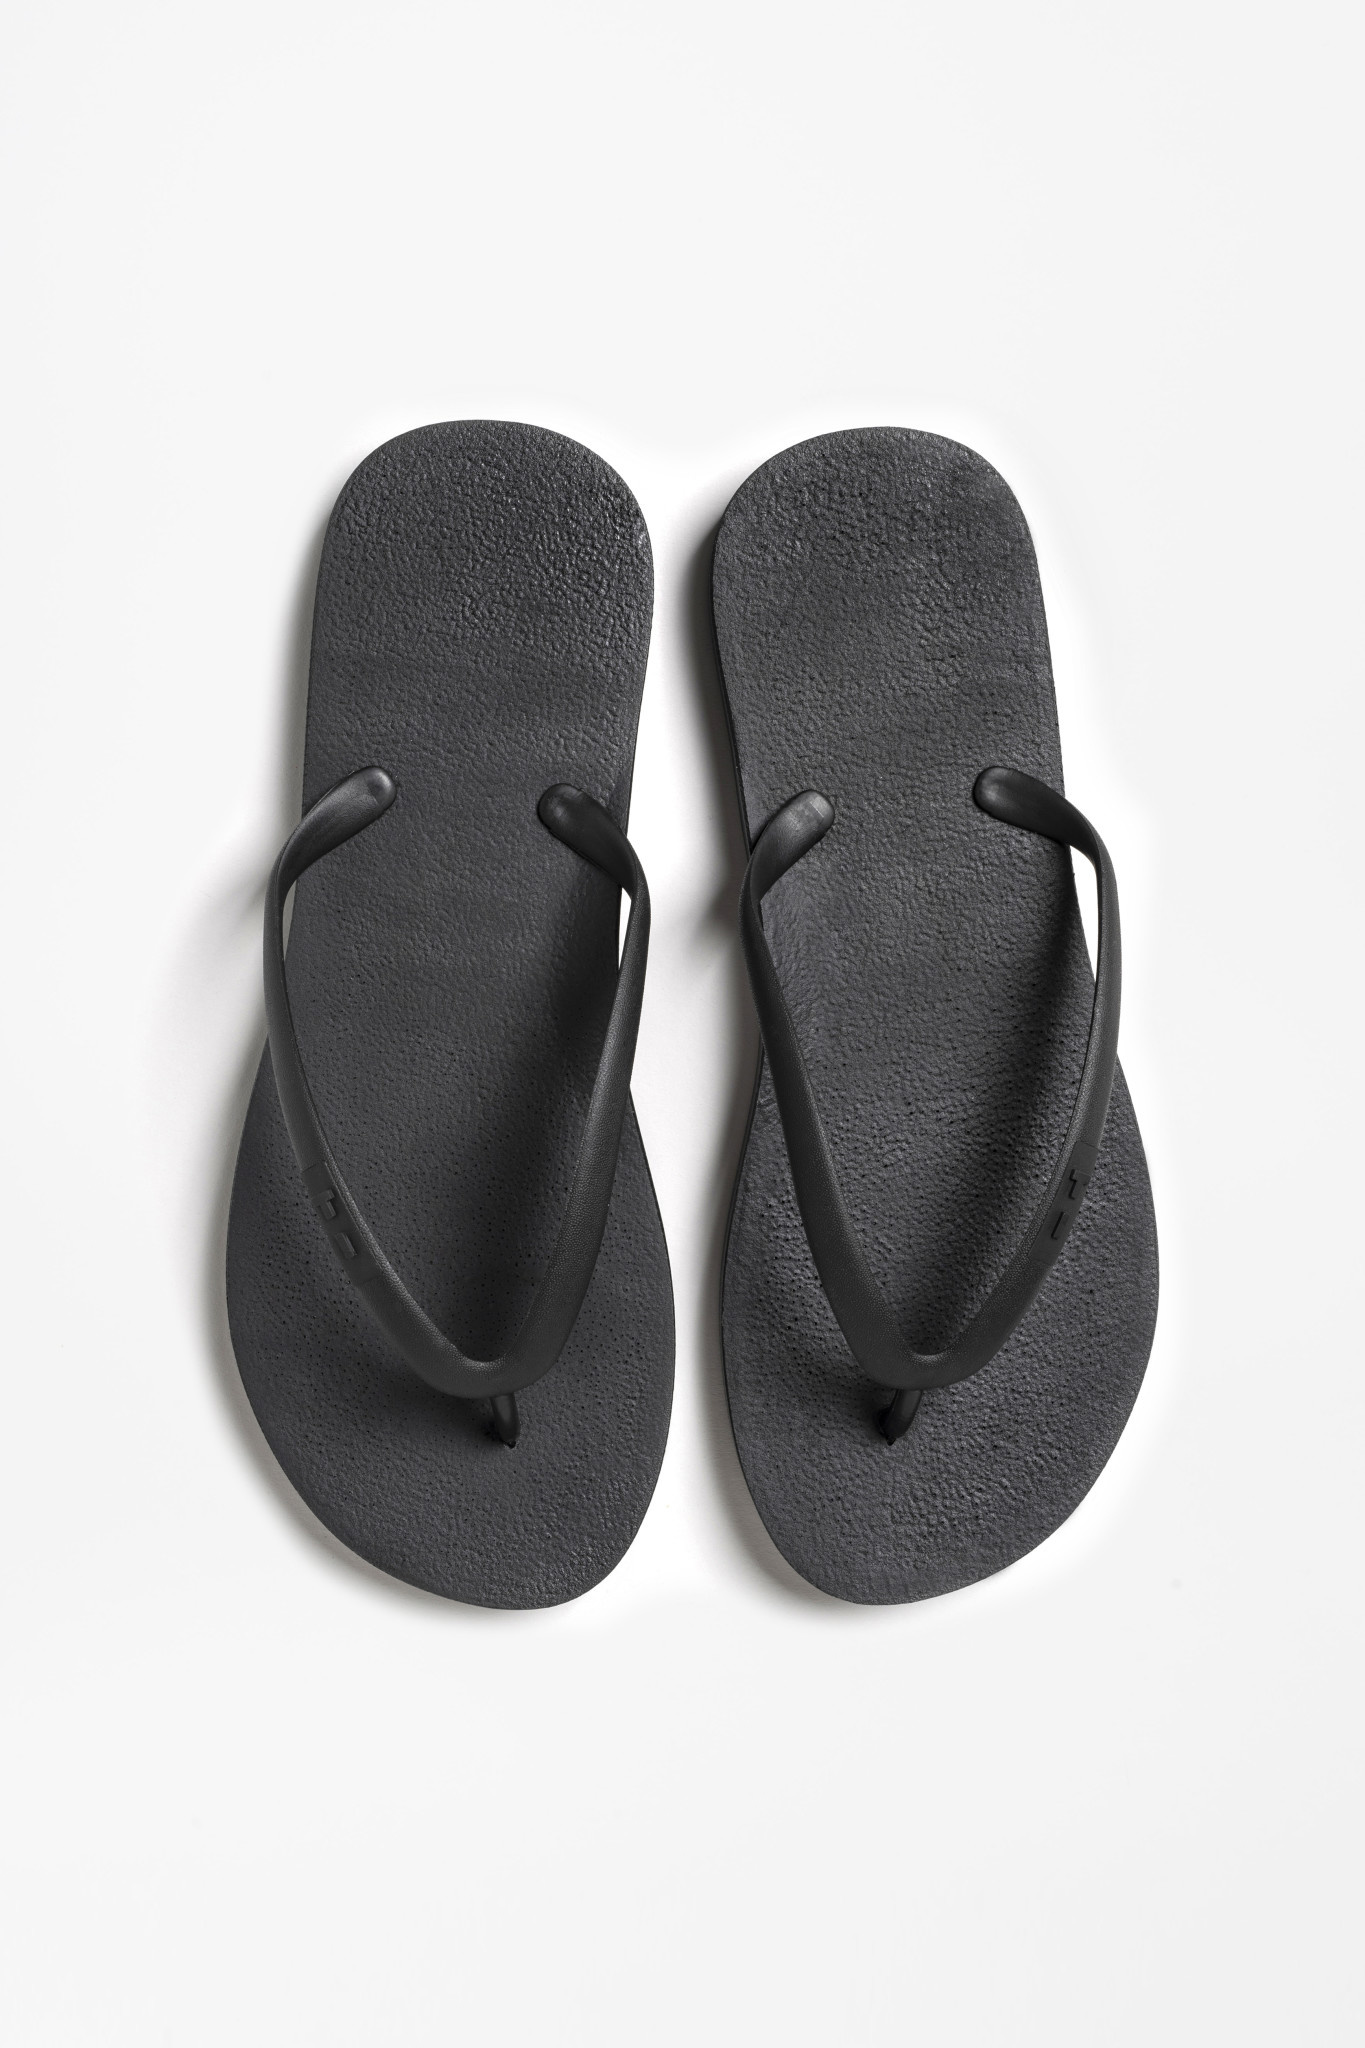 Tidal New York Classic Flip Flop Black - For The Love of Shoes NY